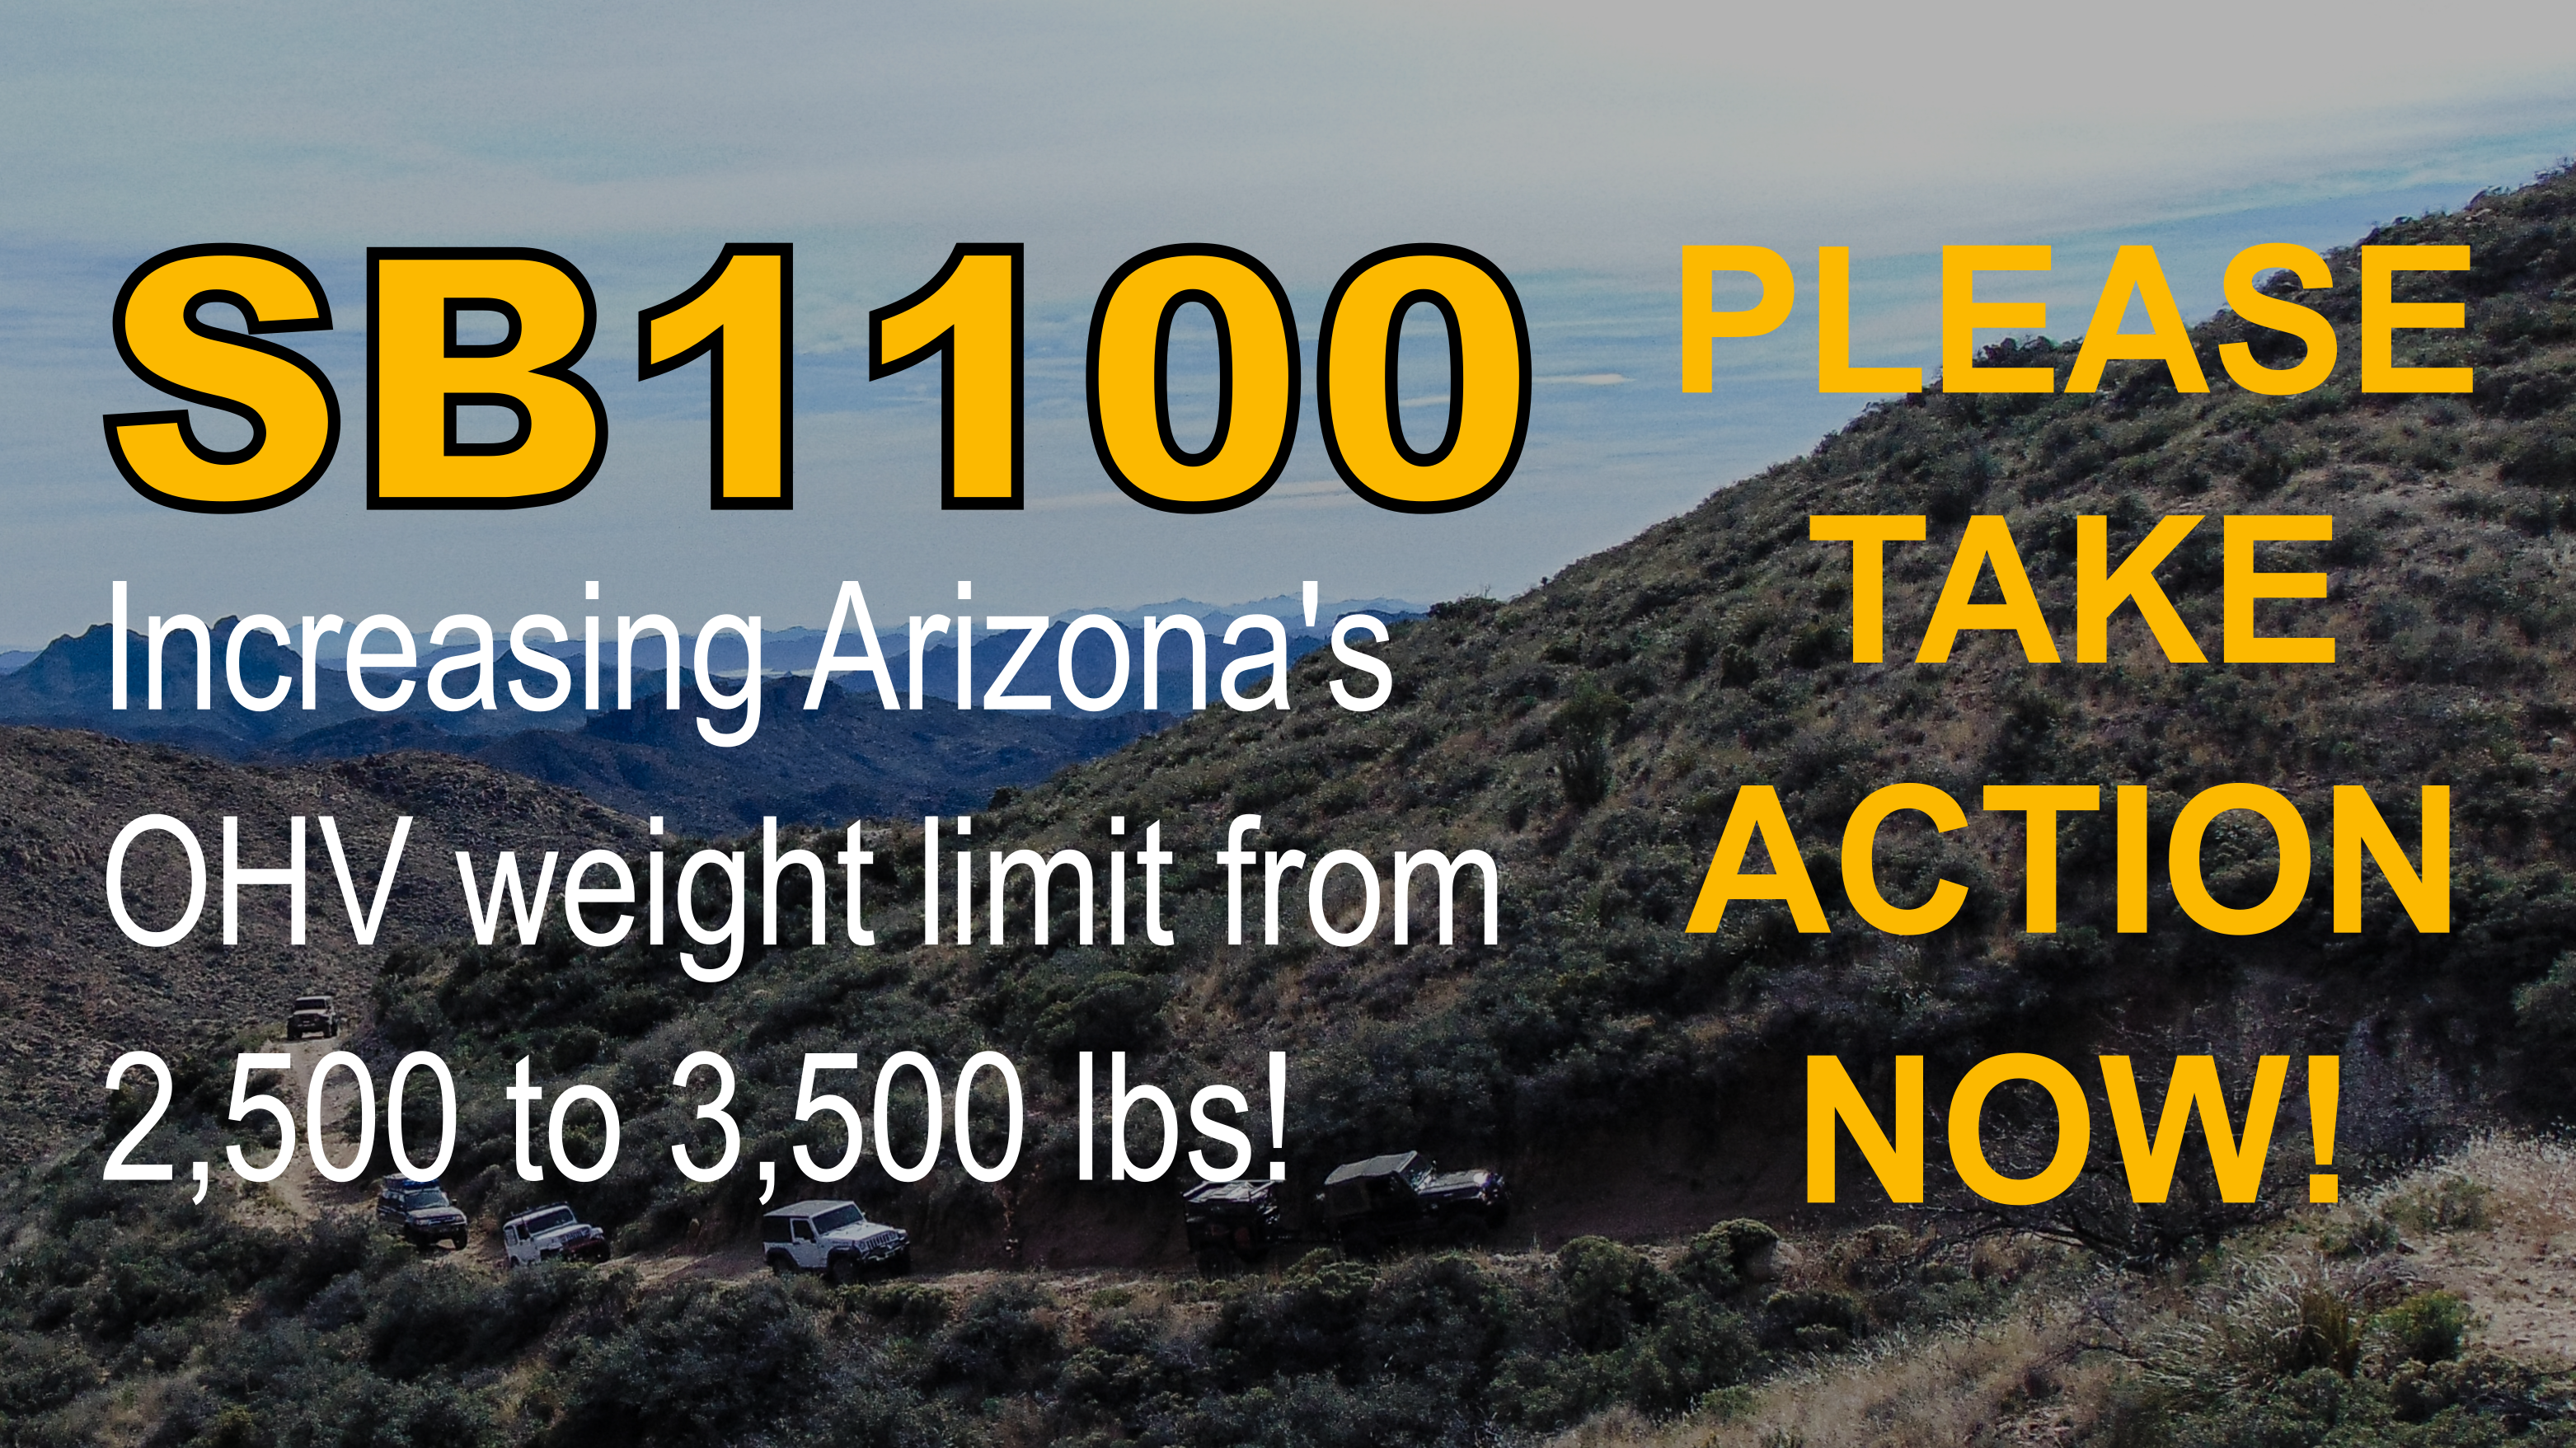 ACTION ALERT | SB1100 increases OHV weight limit to 3,500 lbs